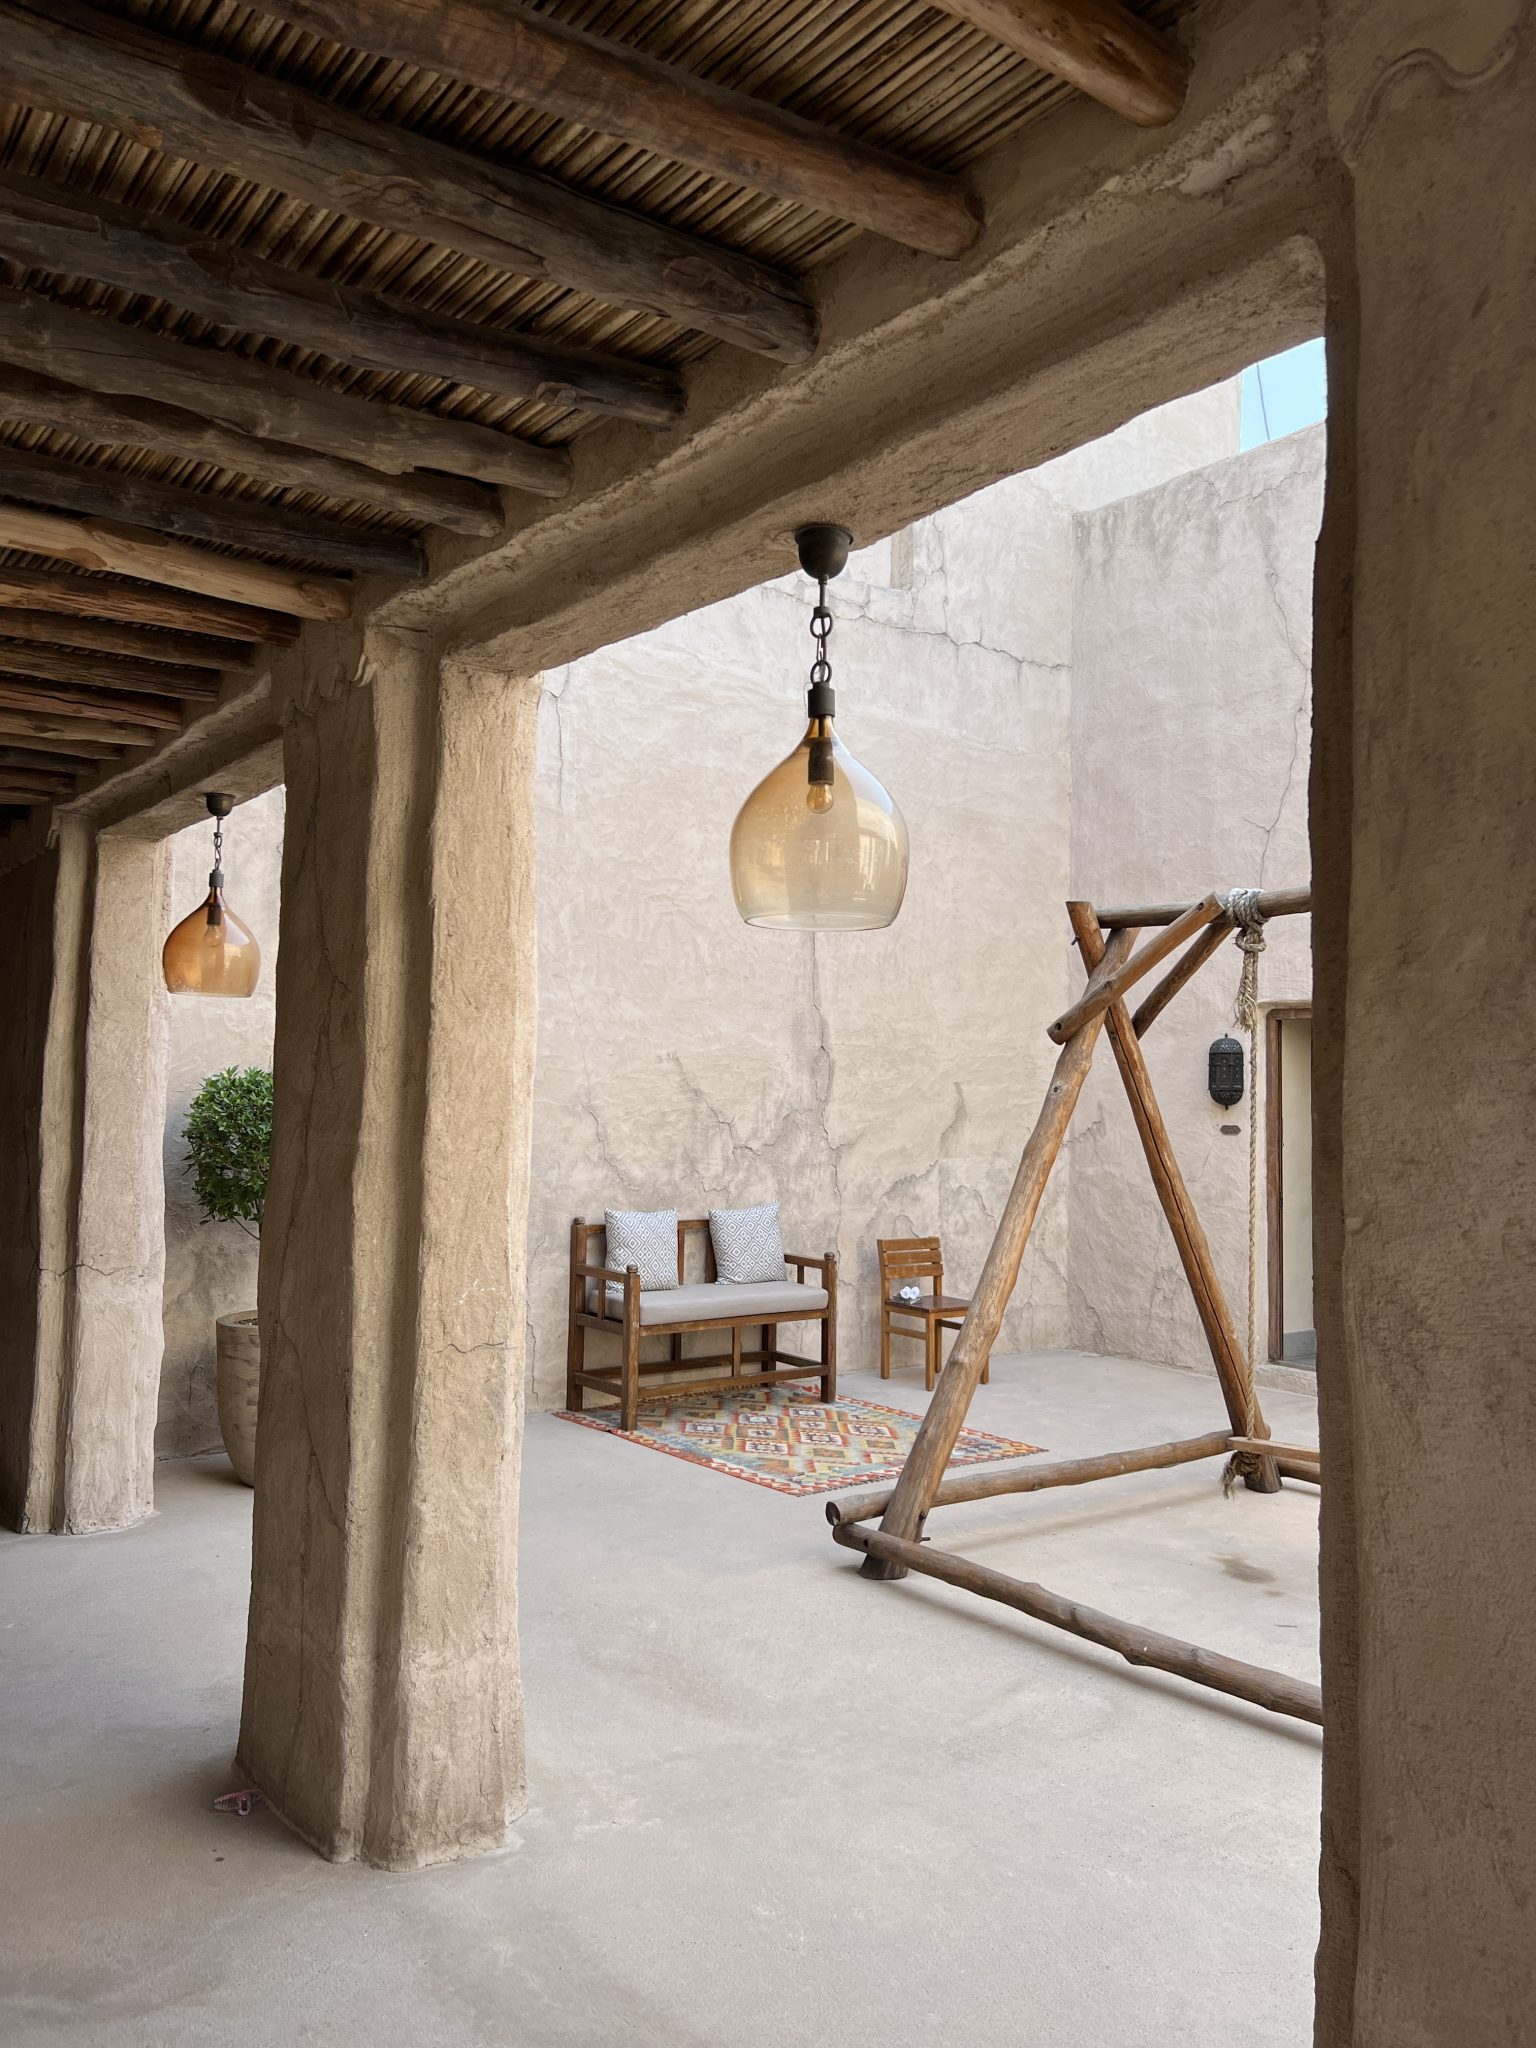 Two glass pendant lights hang from the ceiling. The courtyard features wooden outdoor furniture, including a bench with two cushions and a small chair.